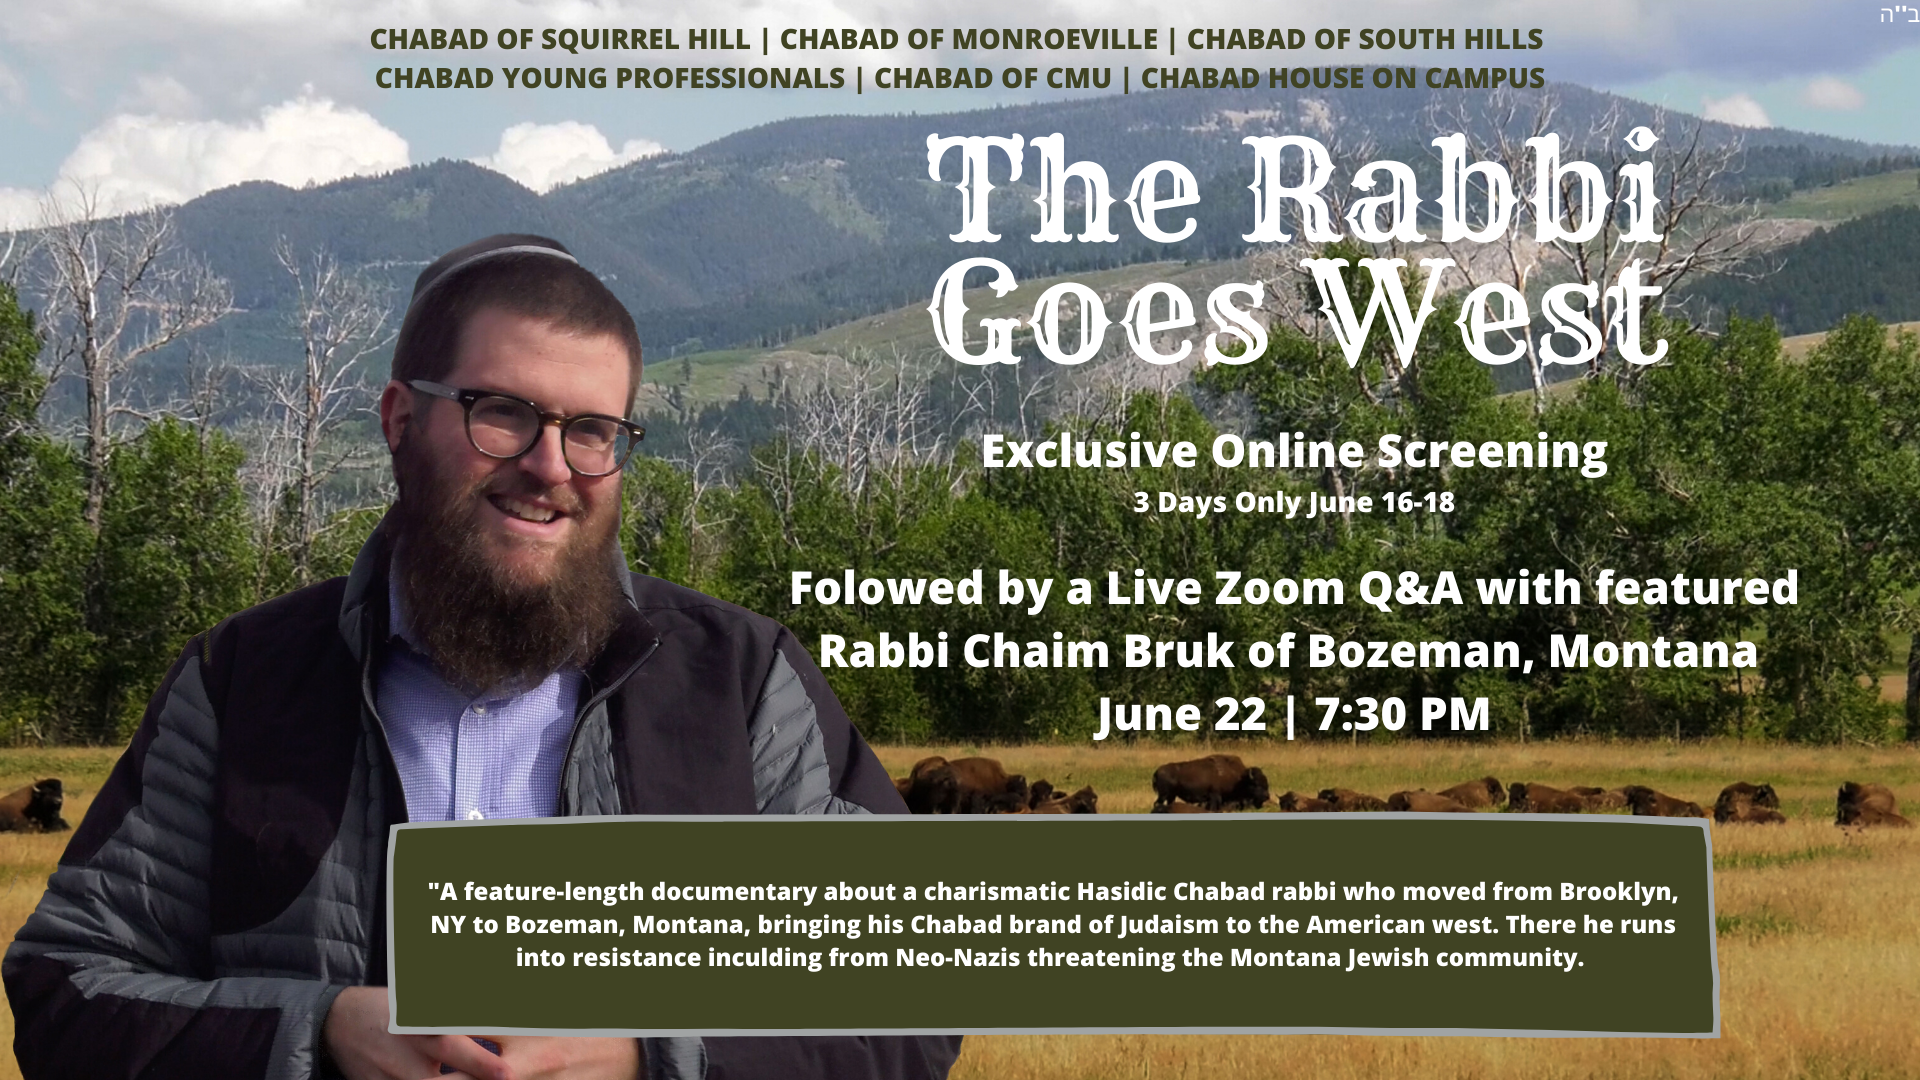 The%20Rabbi%20Goes%20West%20_1_.png